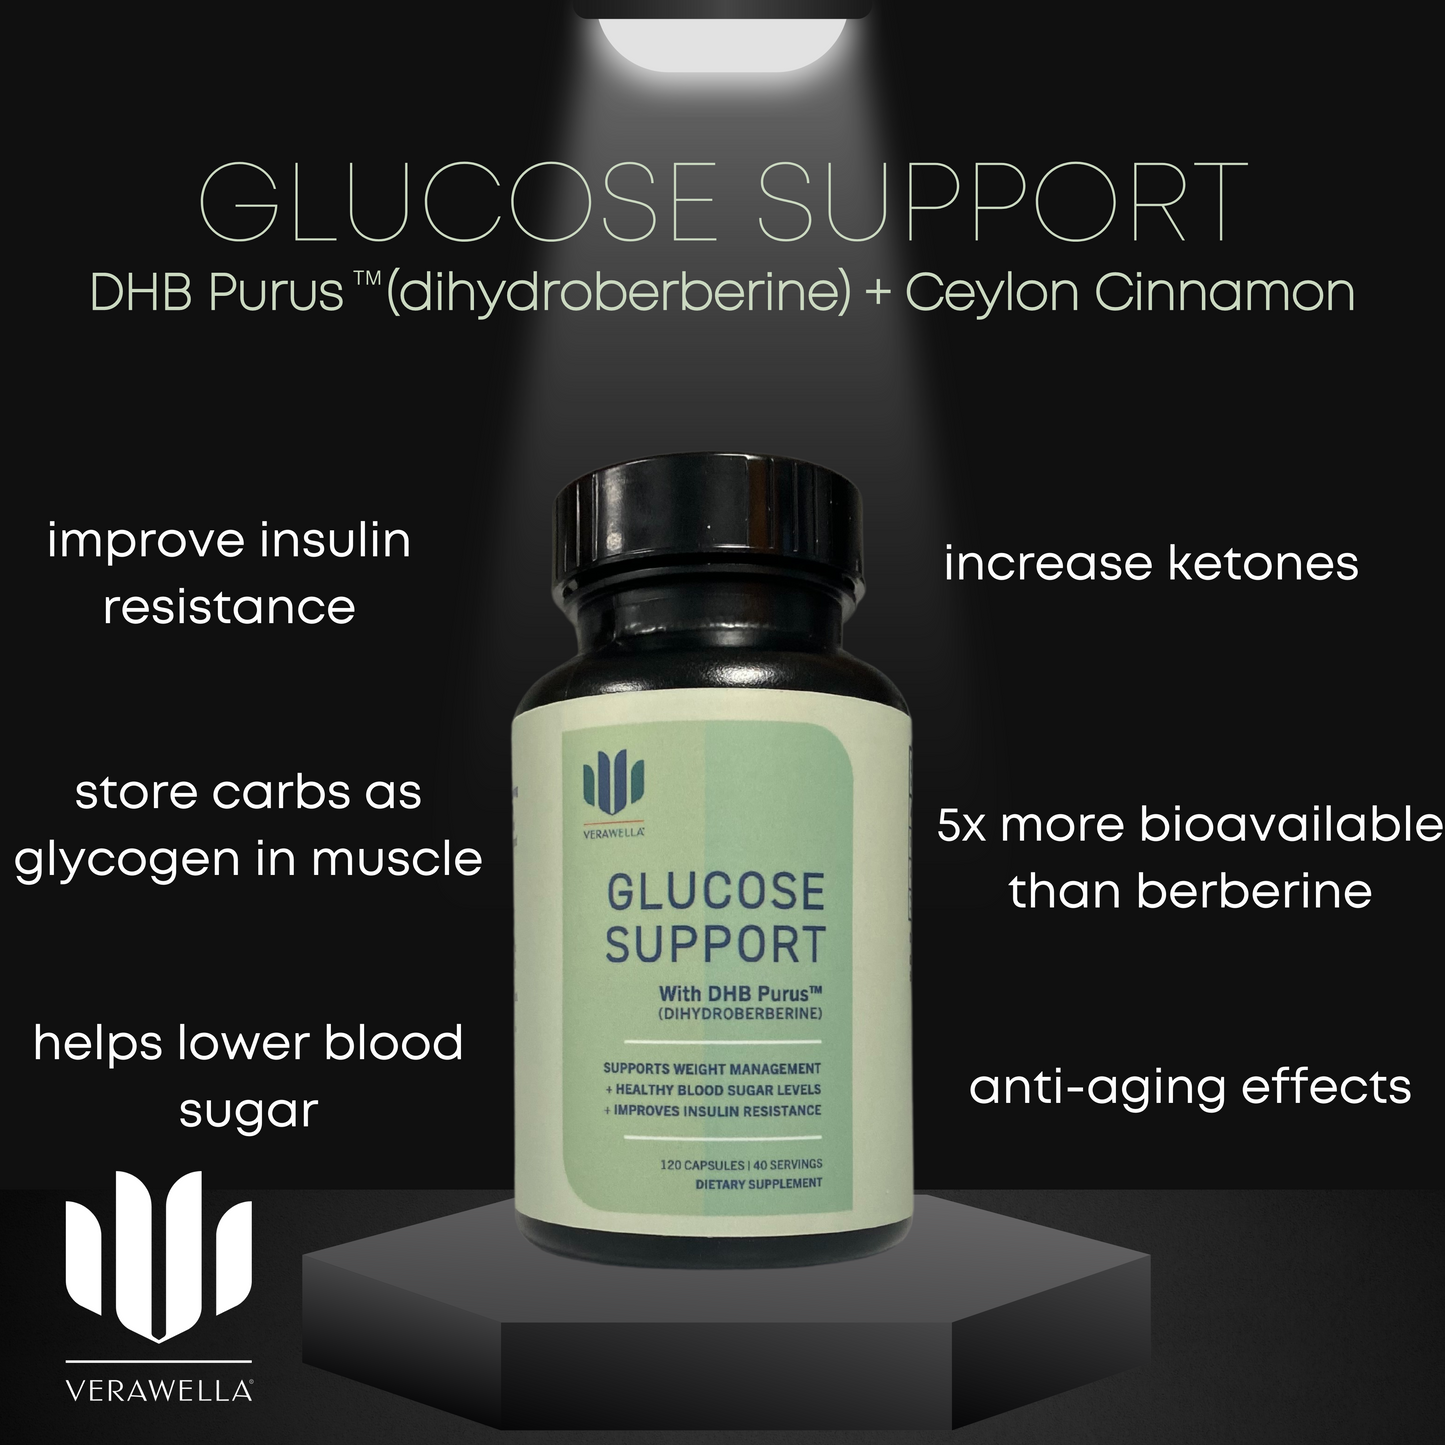 Glucose Support, DHB Purus, dihydroberberine supplement to help with insulin resistance, lower blood sugar, turn carbs into glycogen, in muscle, increase ketones, with anti aging properties. help with type 2 diabetes and prediabetes, and obesity.